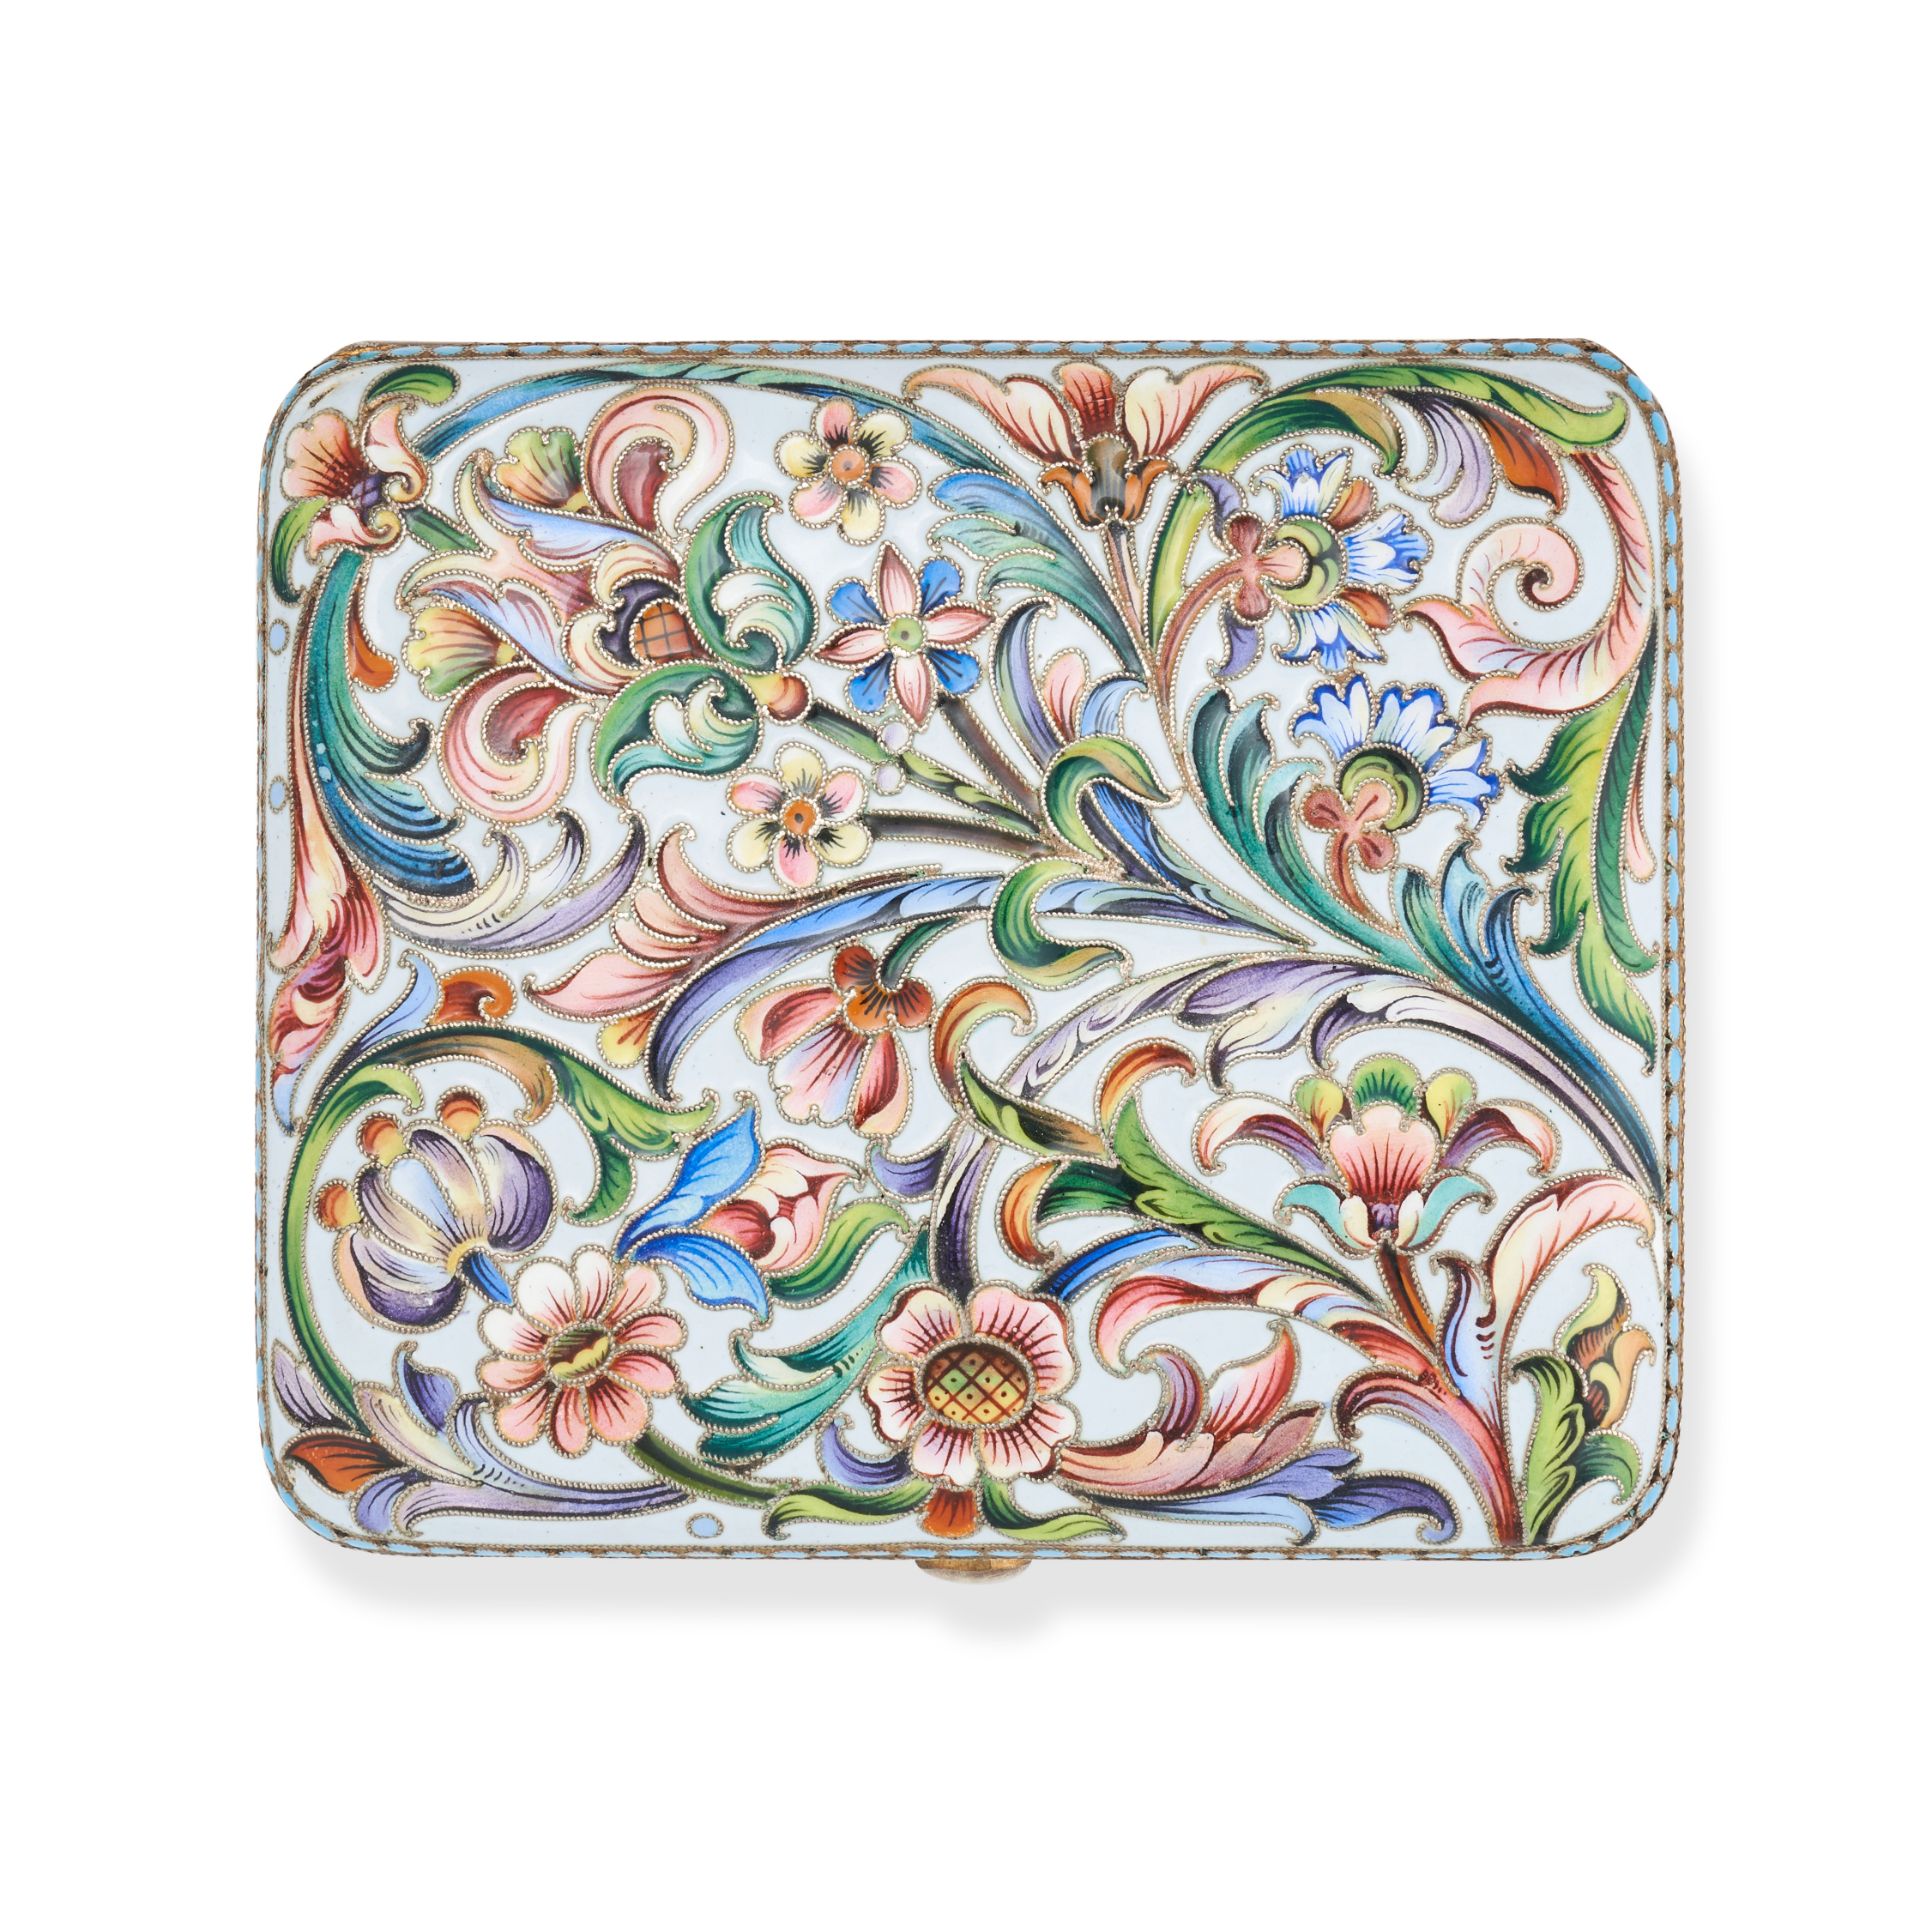 NO RESERVE - AN ANTIQUE RUSSIAN CLOISONNE ENAMEL AND SILVER CIGARETTE CASE, MOSCOW 1908-17 in 84 ...